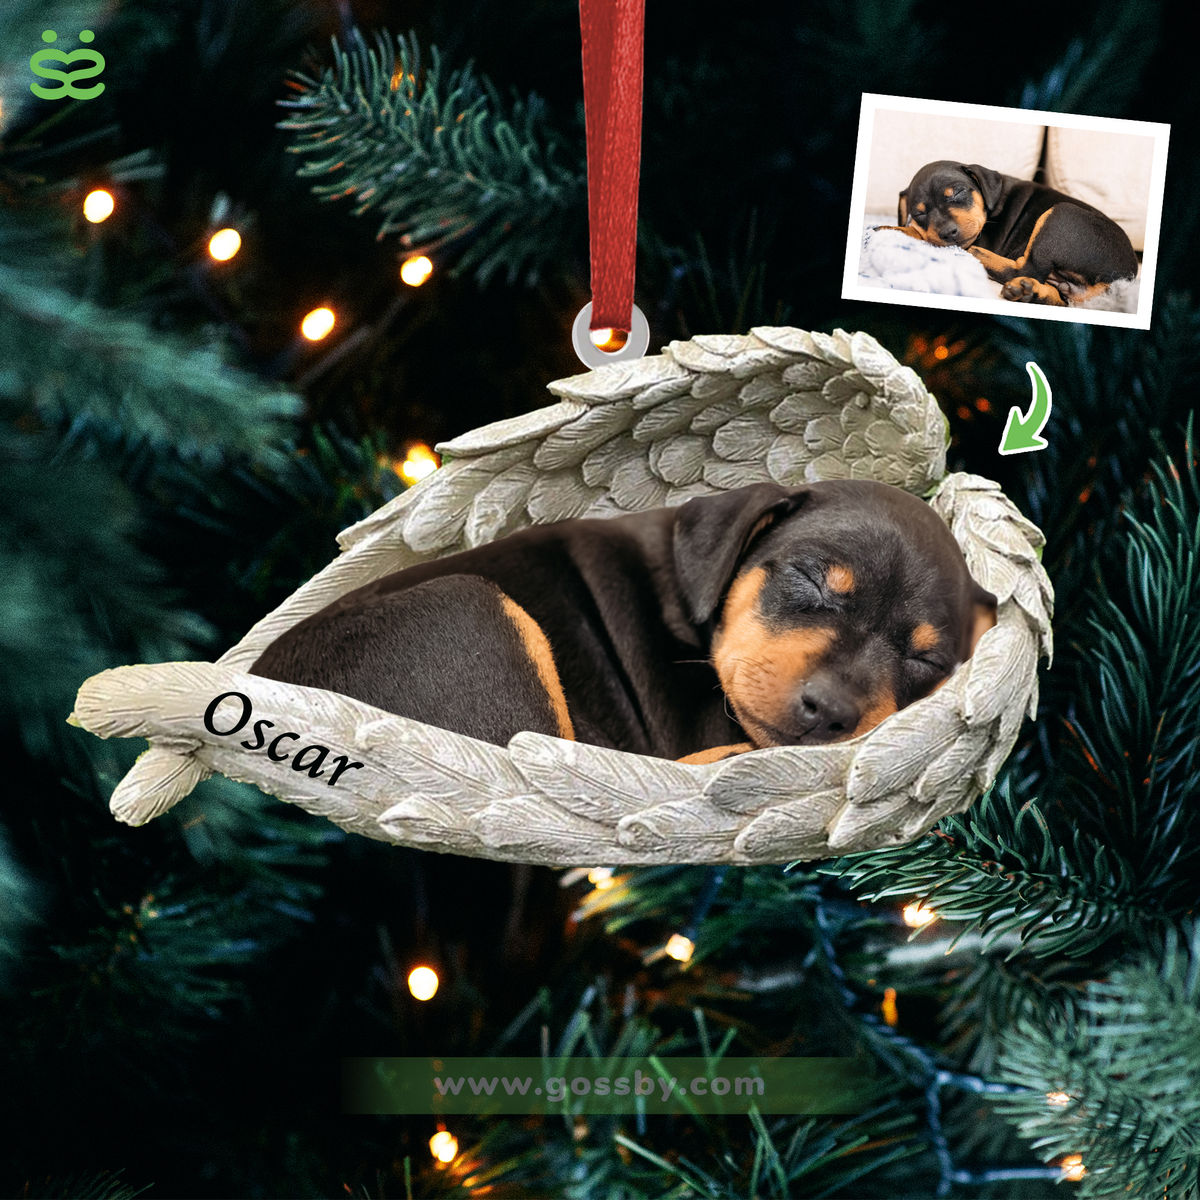 Dog Acrylic Ornament - Dog Lover Gifts - Sleeping Pet Within Angel Wings -  Customized Your Photo Ornament, Custom